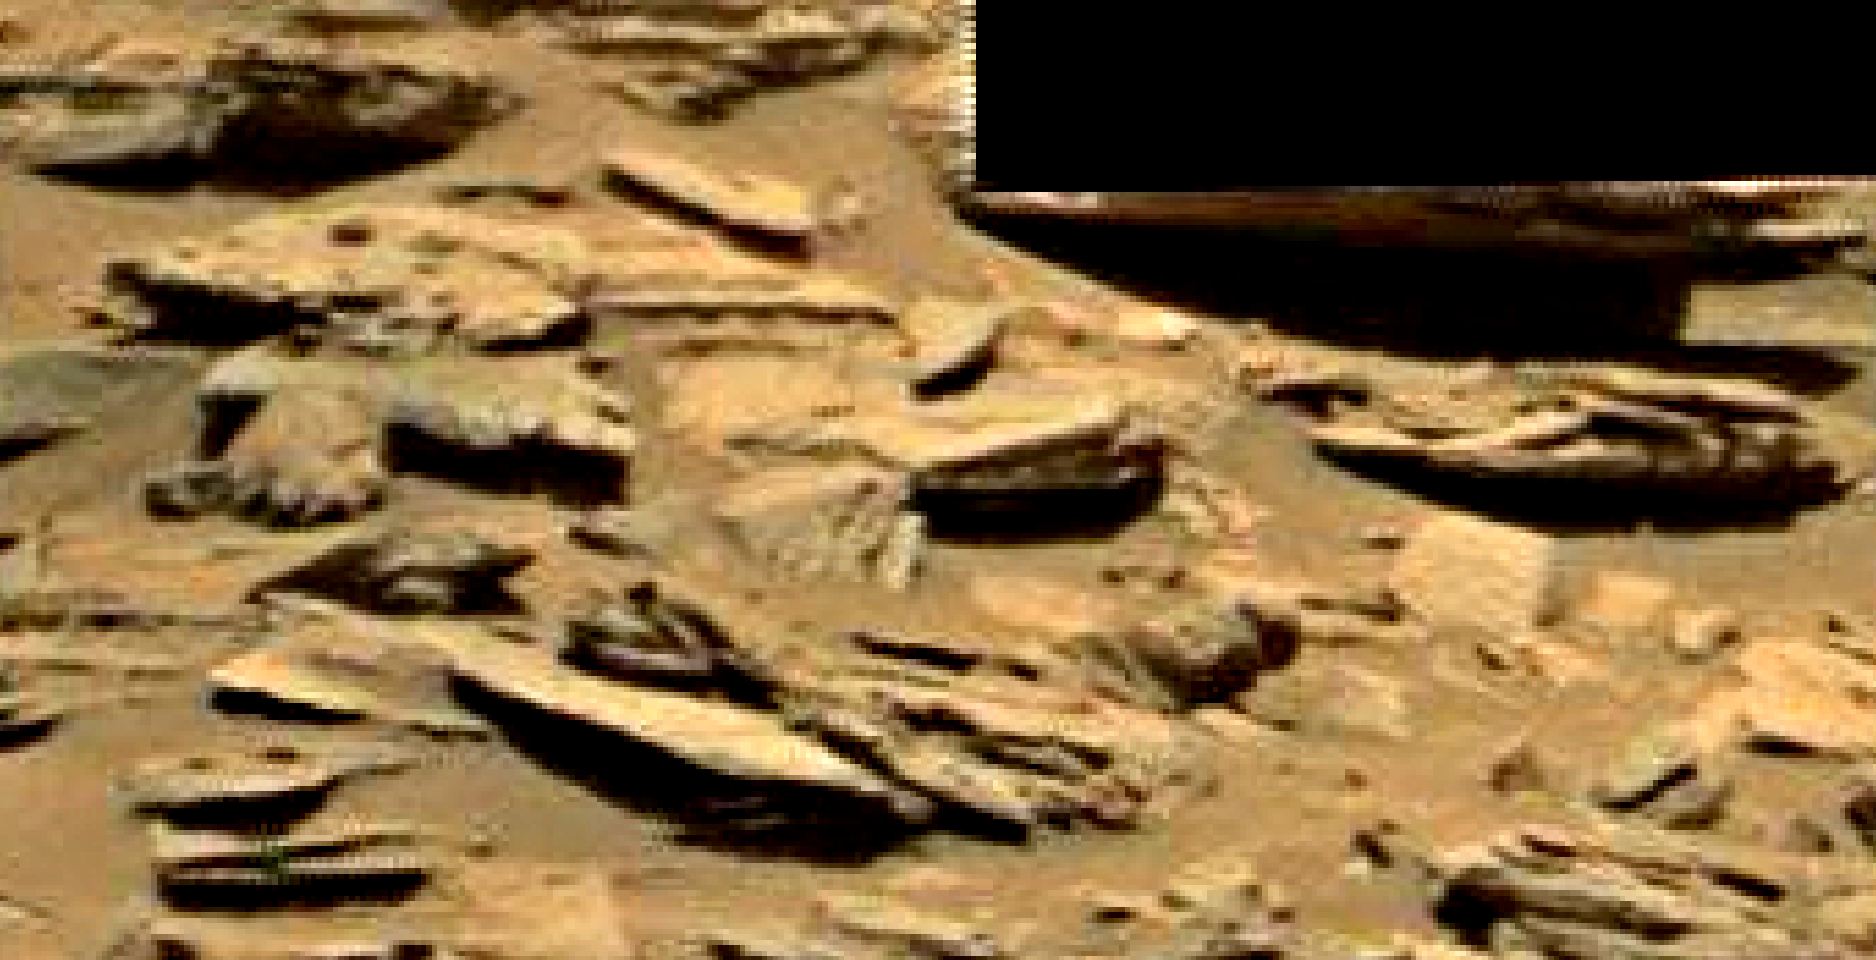 mars sol 1353 anomaly-artifacts 28b was life on mars